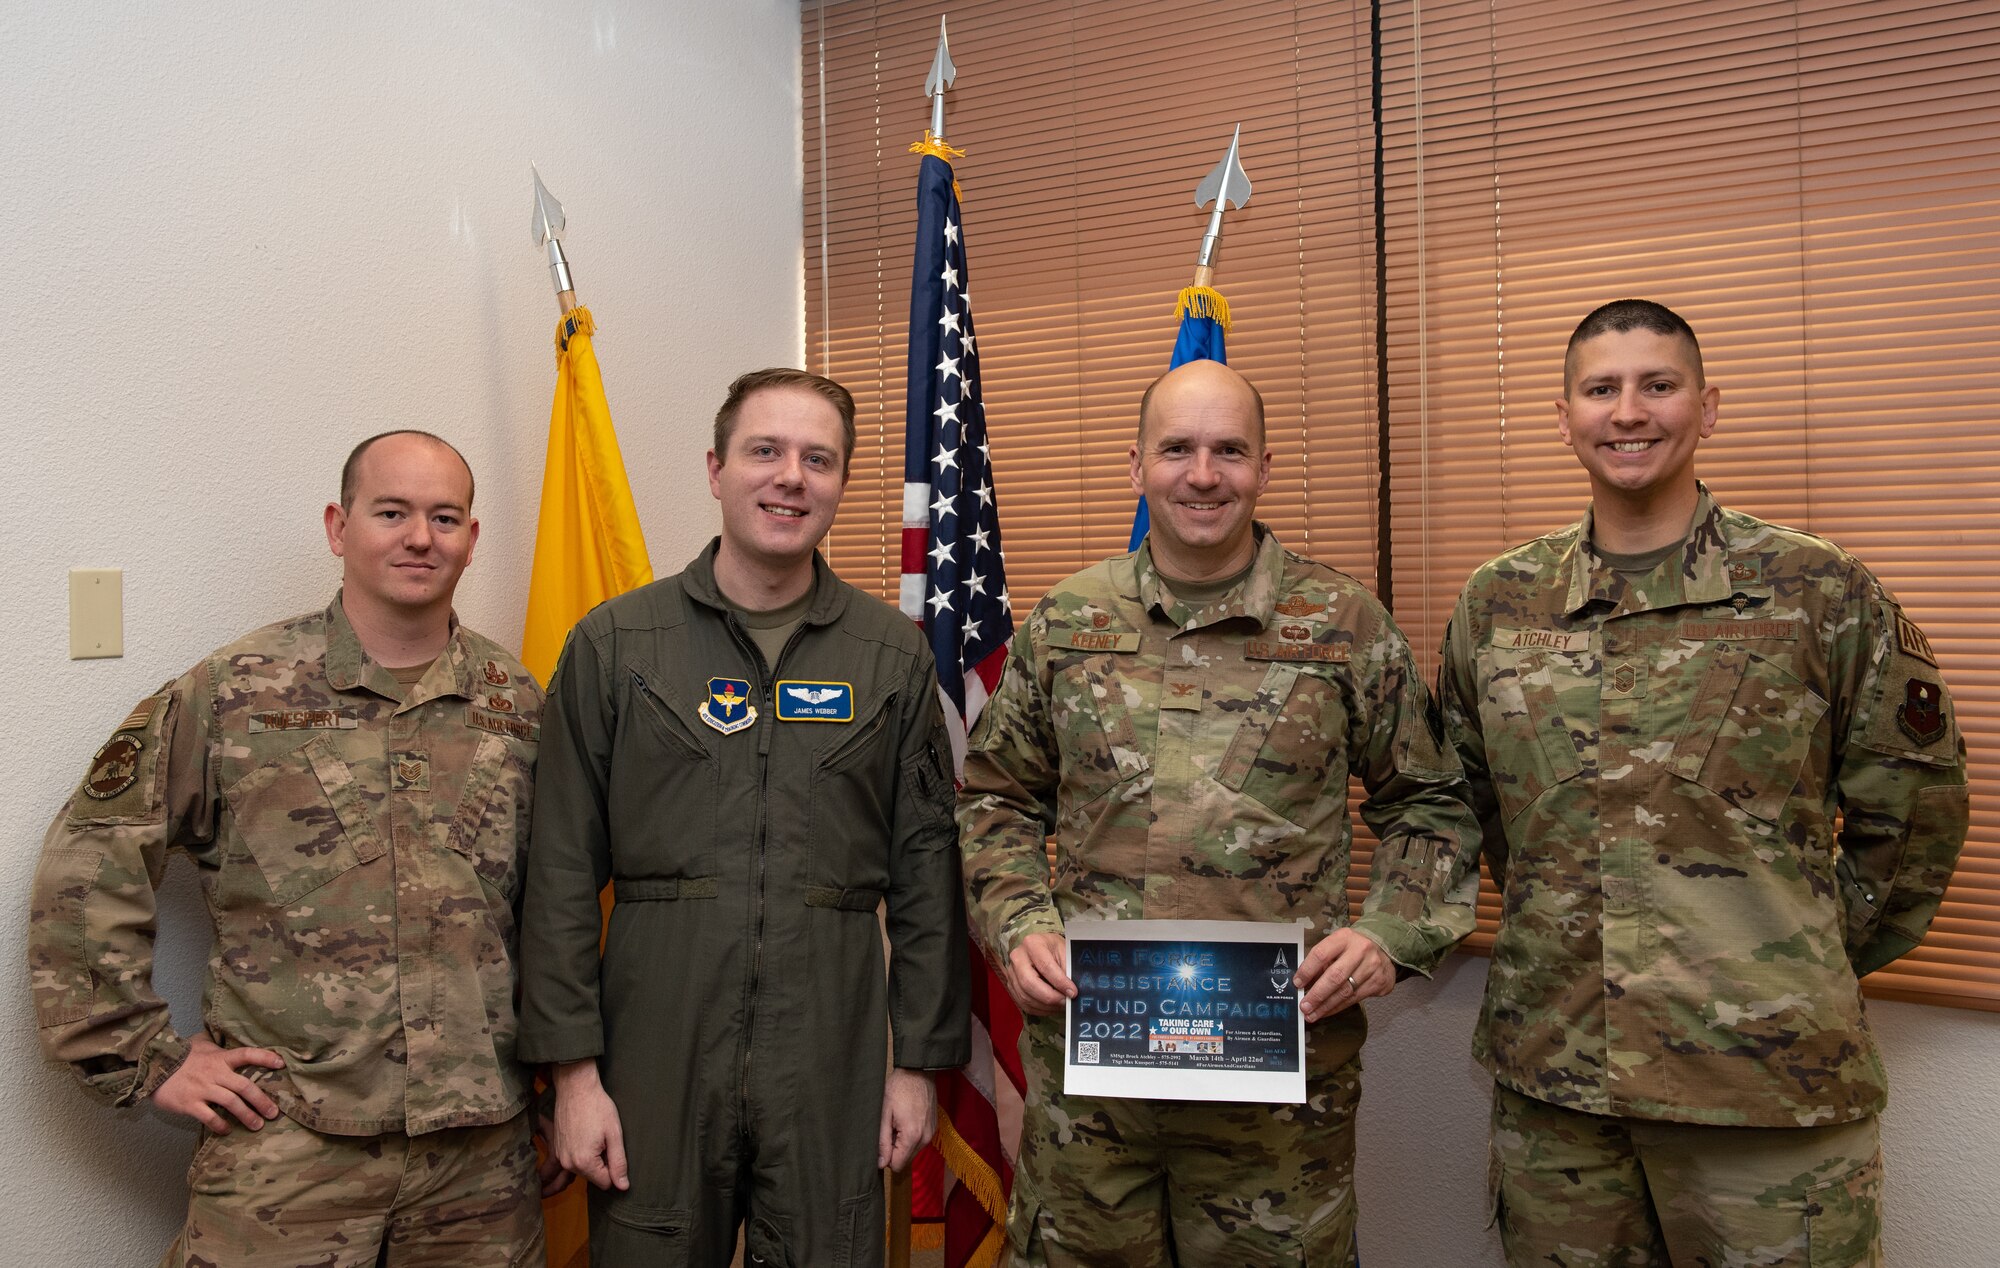 Col. Ryan Keeney and Air Force Assistance Fund representatives pose for a photo.